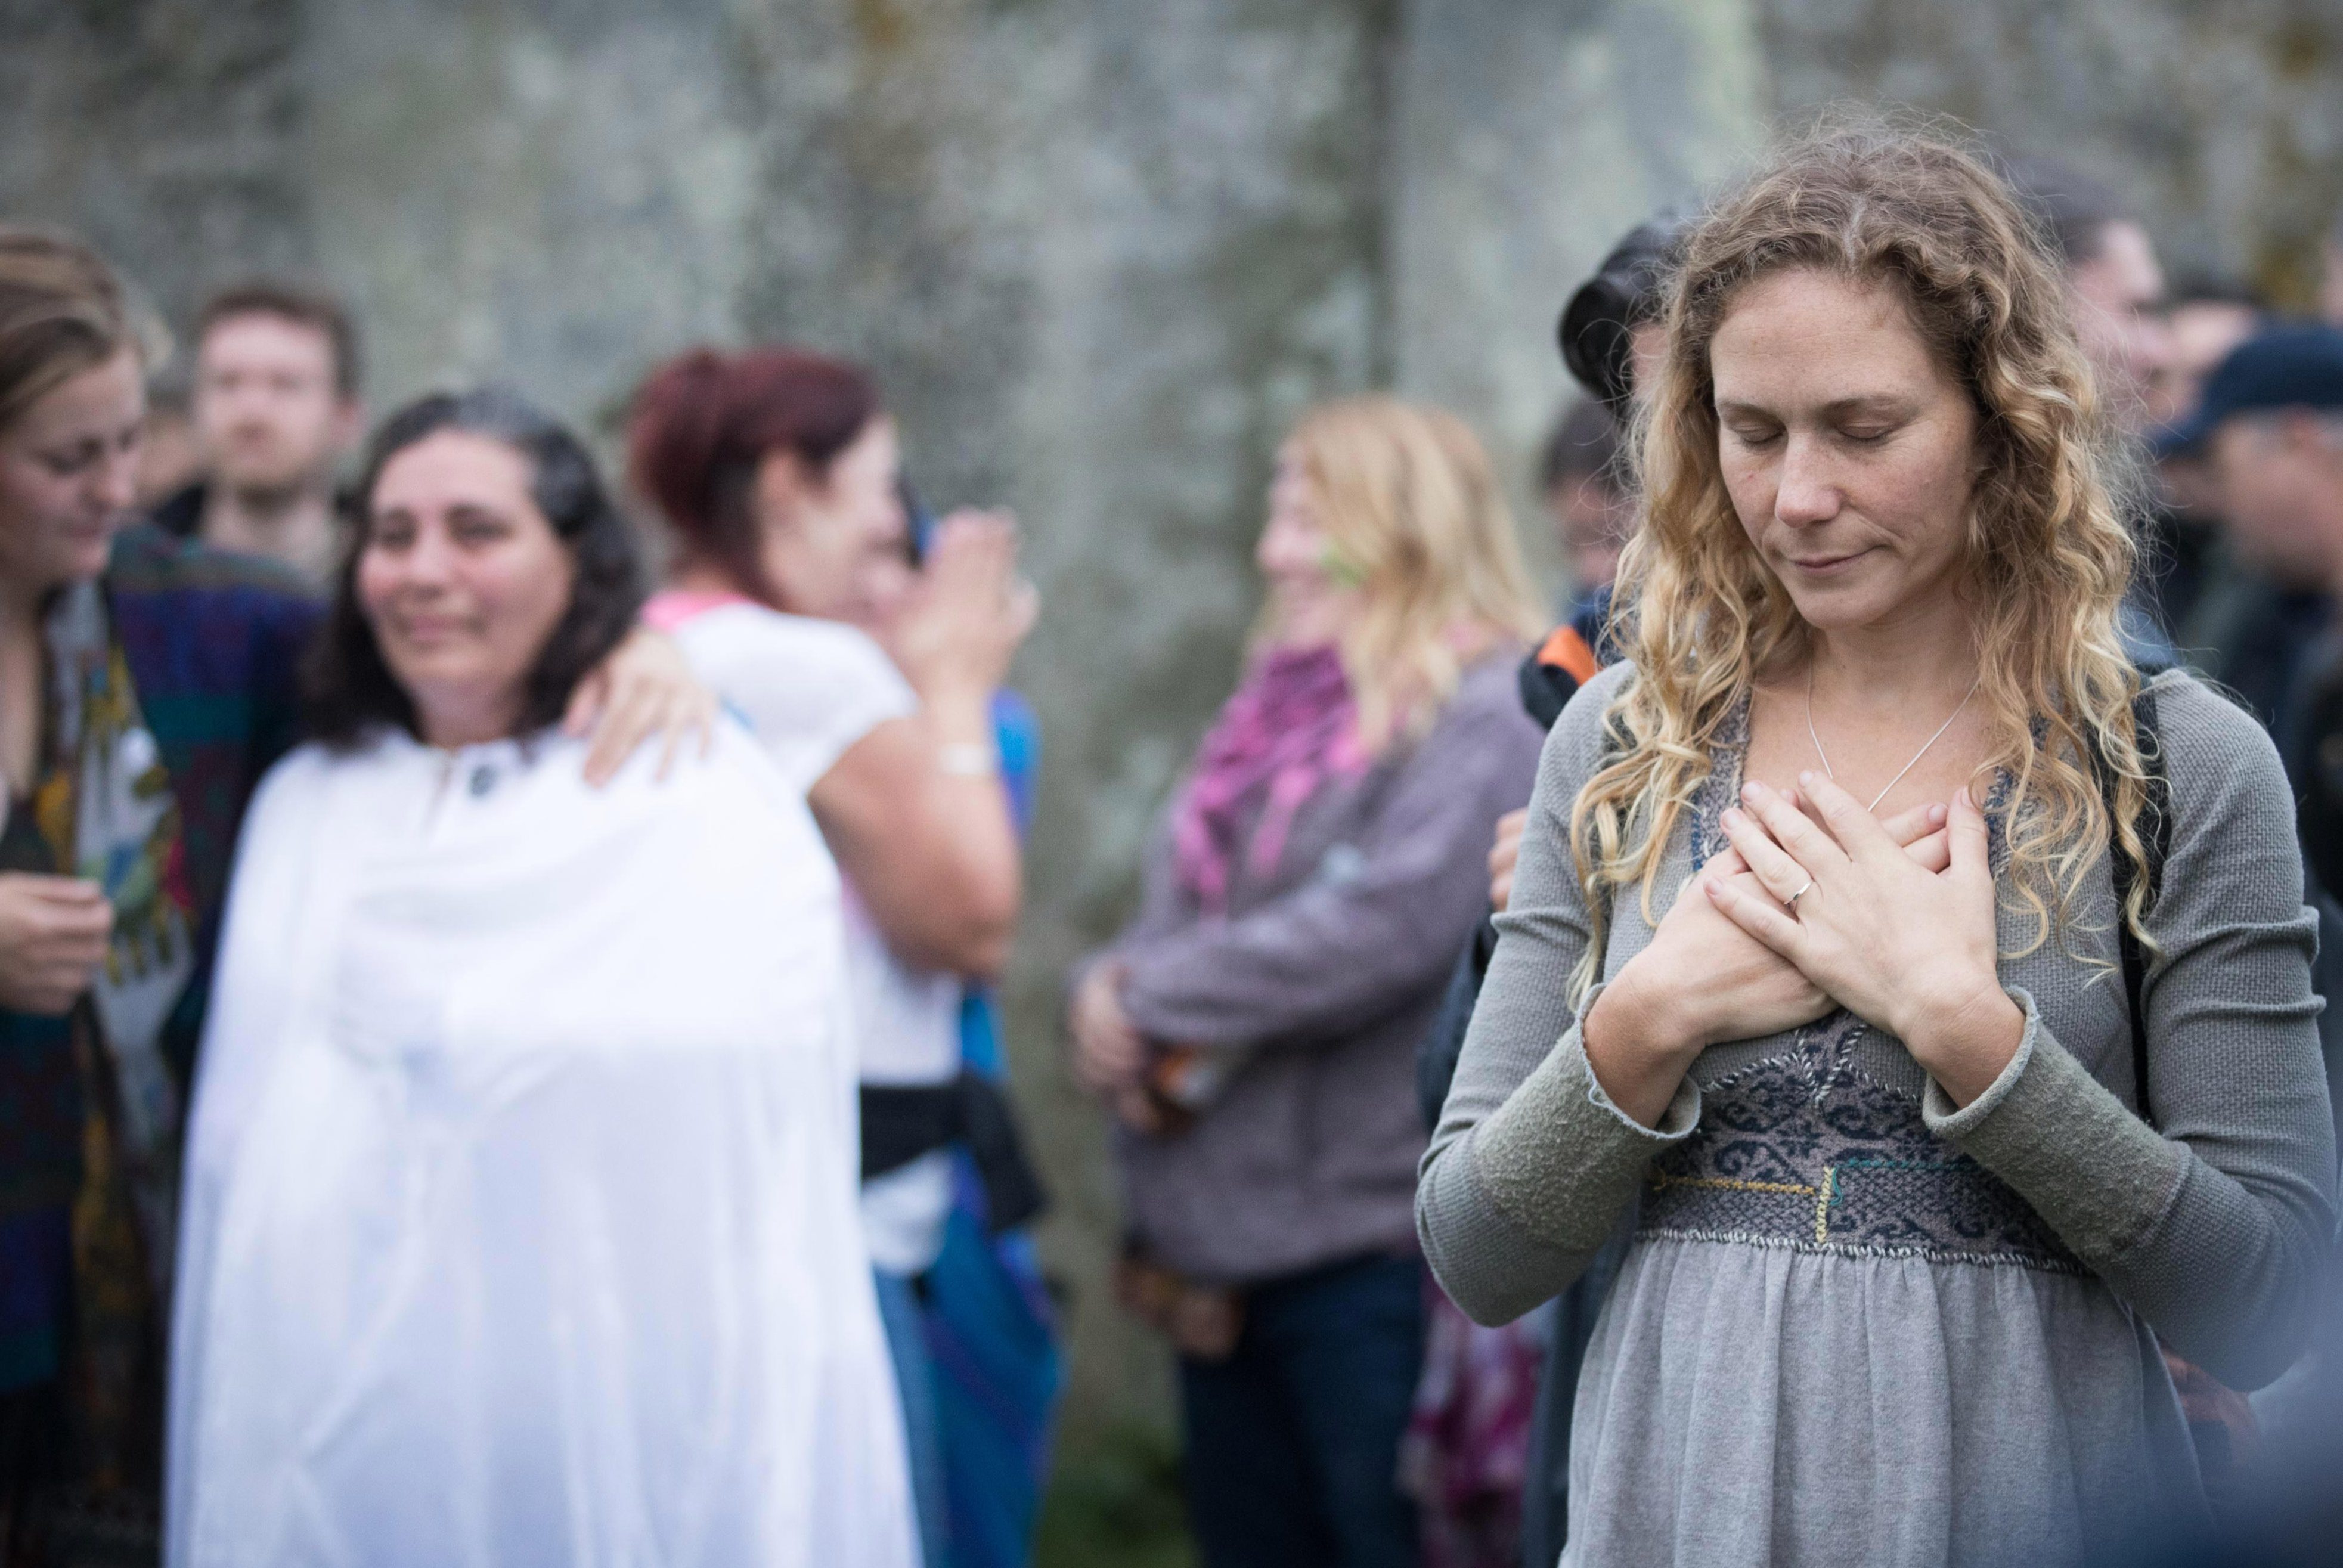  For some followers, druidry is spiritual - for others, its a religion